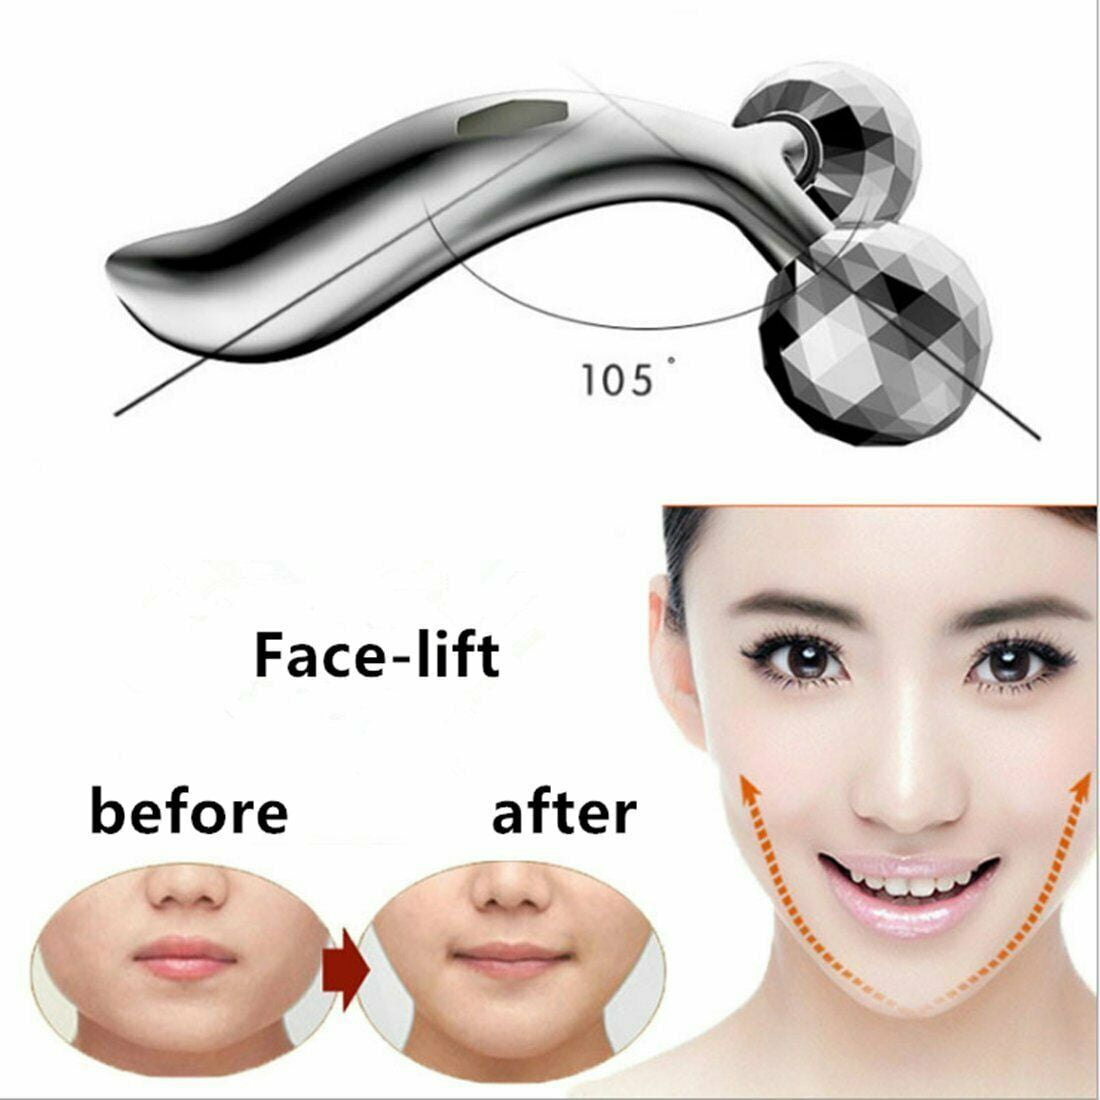 3D Face Lift Device Faciacl Beauty&Health Tool Thin Face Massager Bandages  V Face Correction Face Shaper Slimmer Mask From Nestorlong2, $2.64